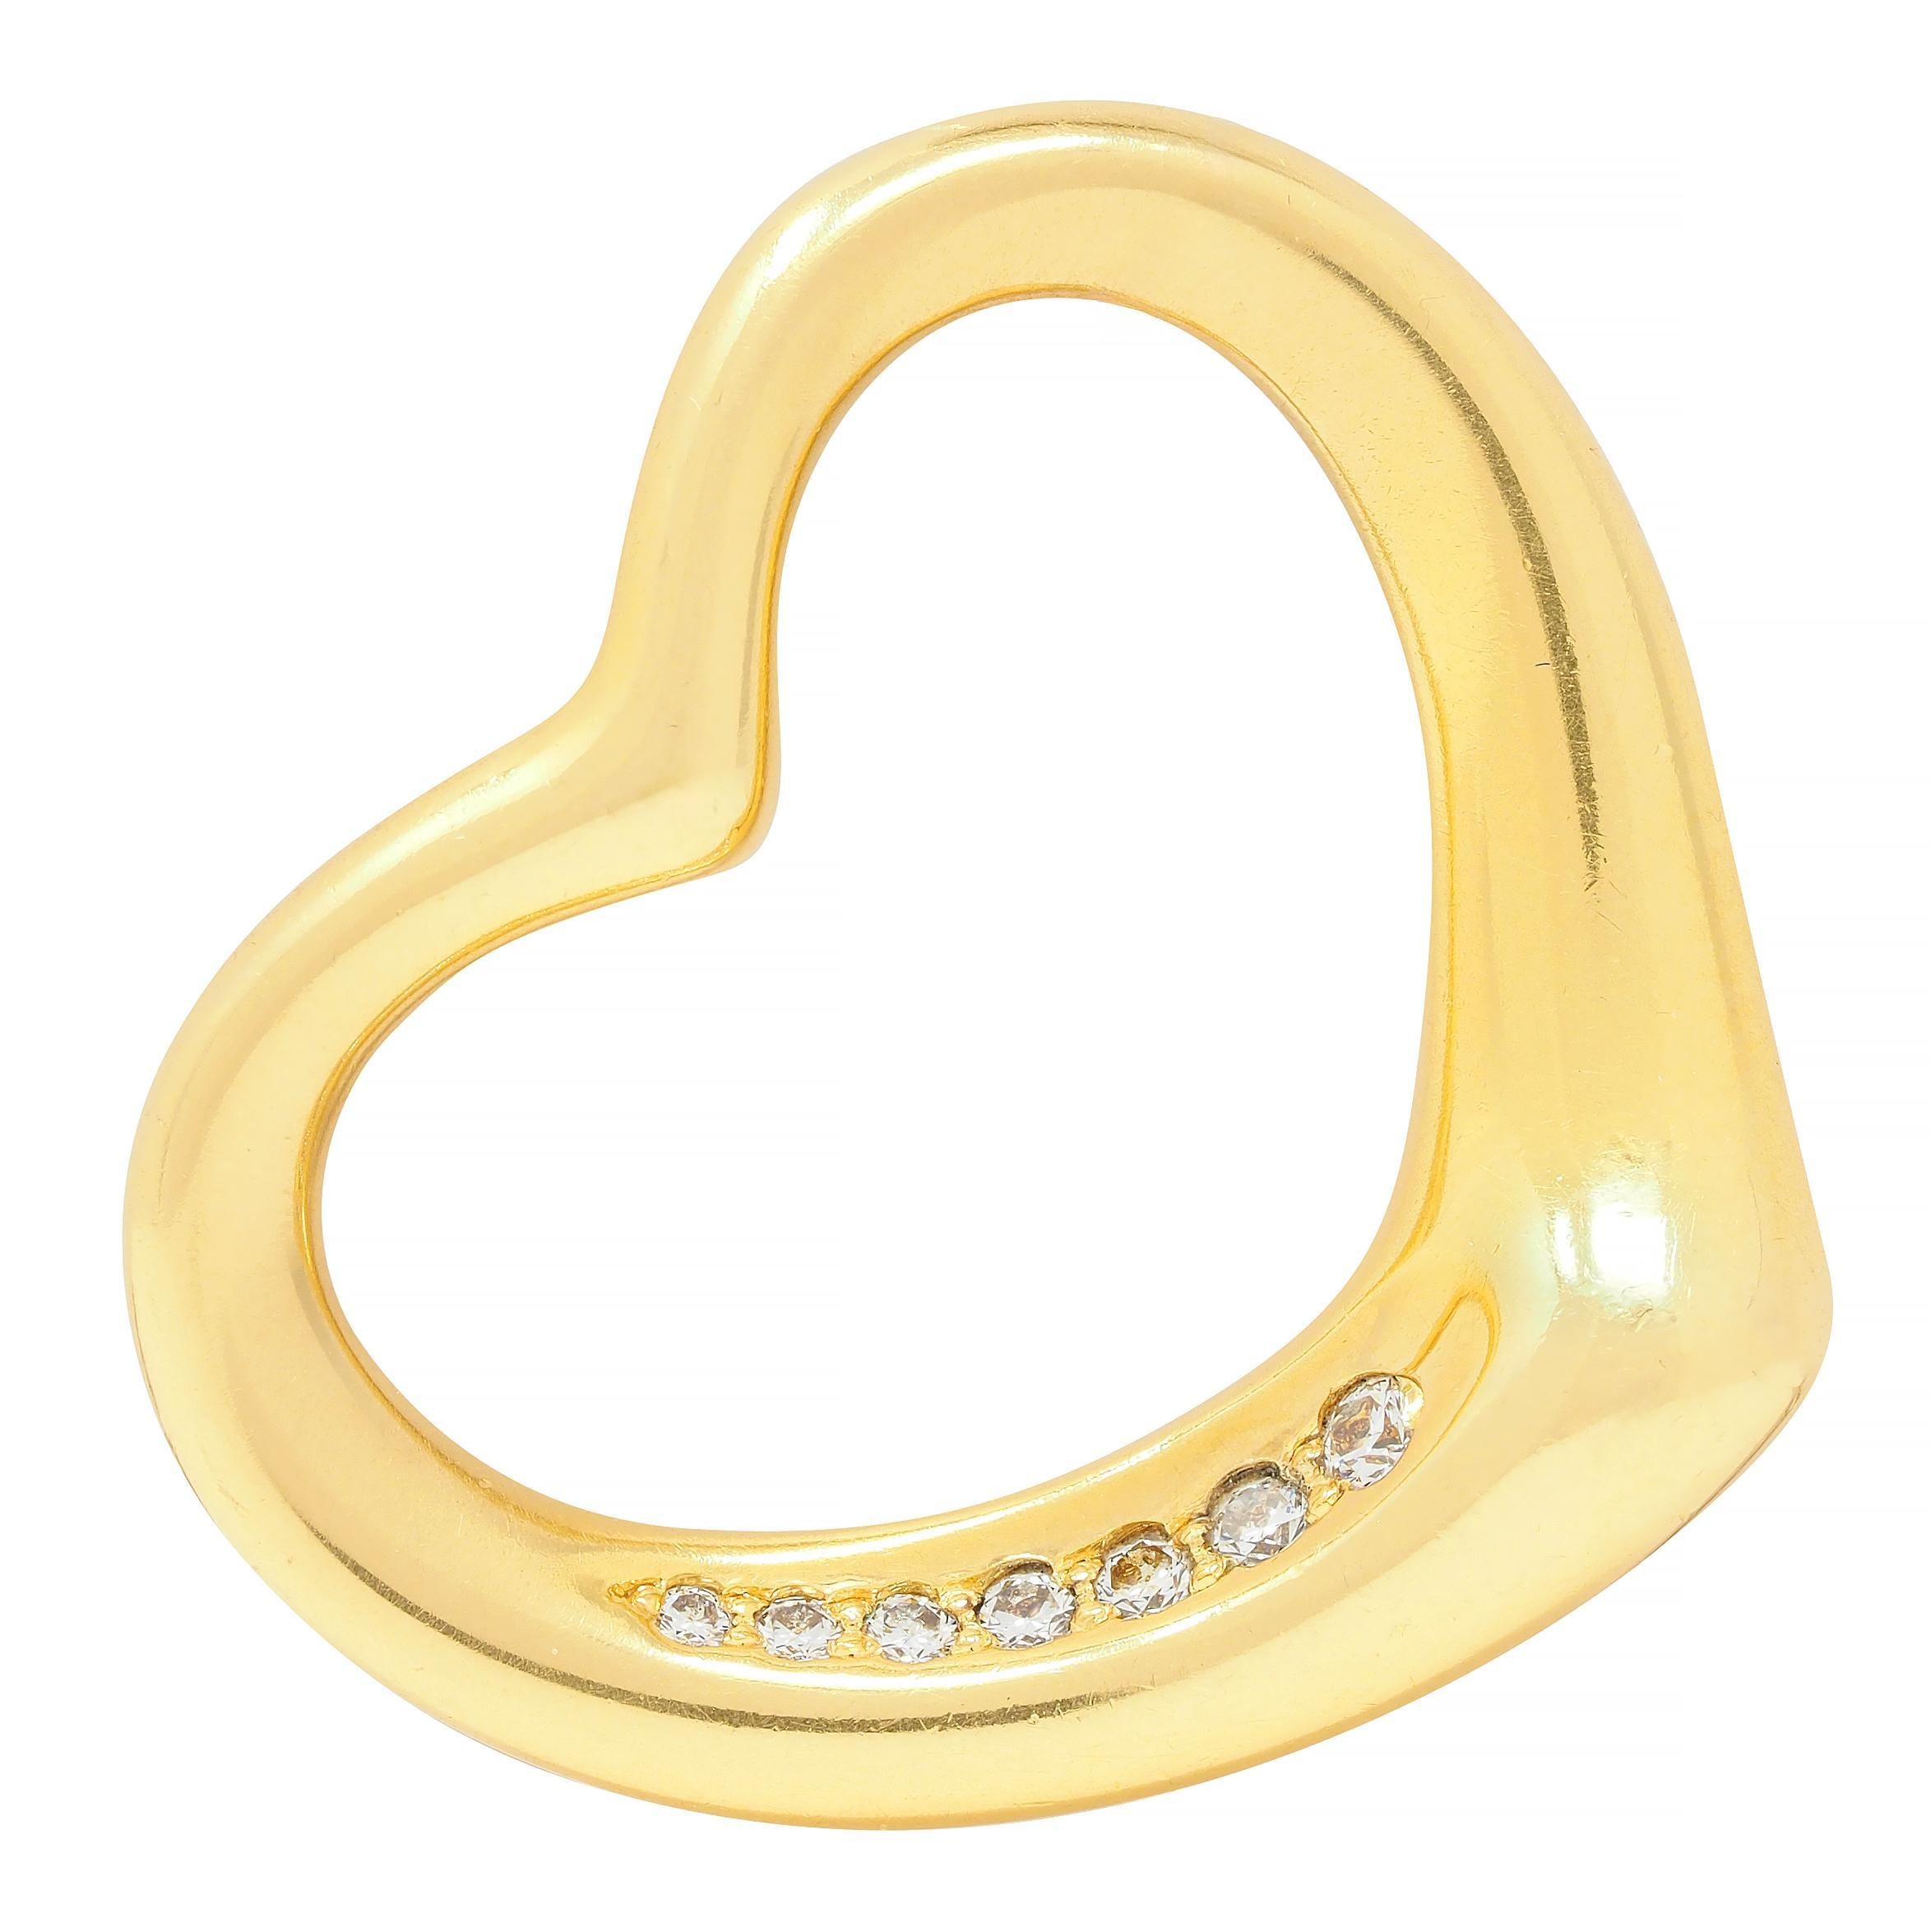 Designed as a sinuous pierced open heart pendant
With bead set round brilliant cut diamonds
Weighing approximately 0.14 carat total
Eye clean and bright
Completed by high polish finish
Stamped for 18 karat gold
Fully signed Elsa Peretti for Tiffany